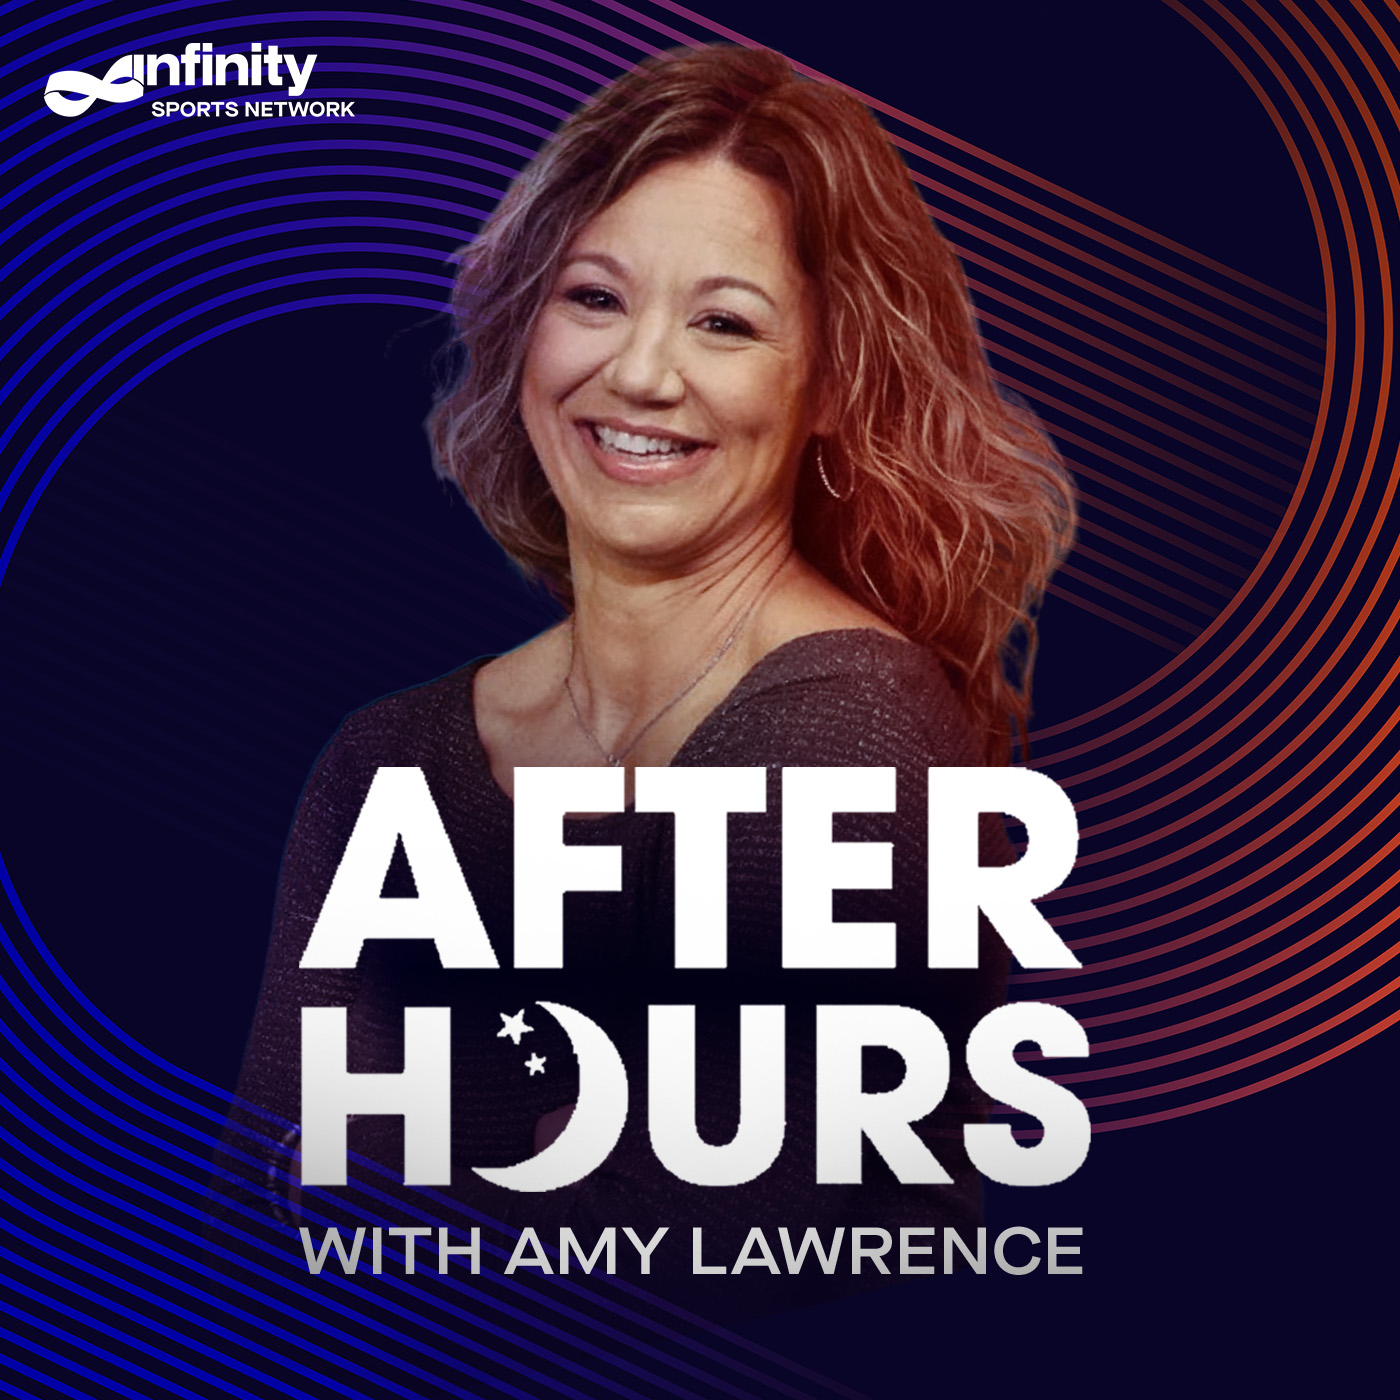 6/29/21 After Hours with Amy Lawrence PODCAST: Hour 1